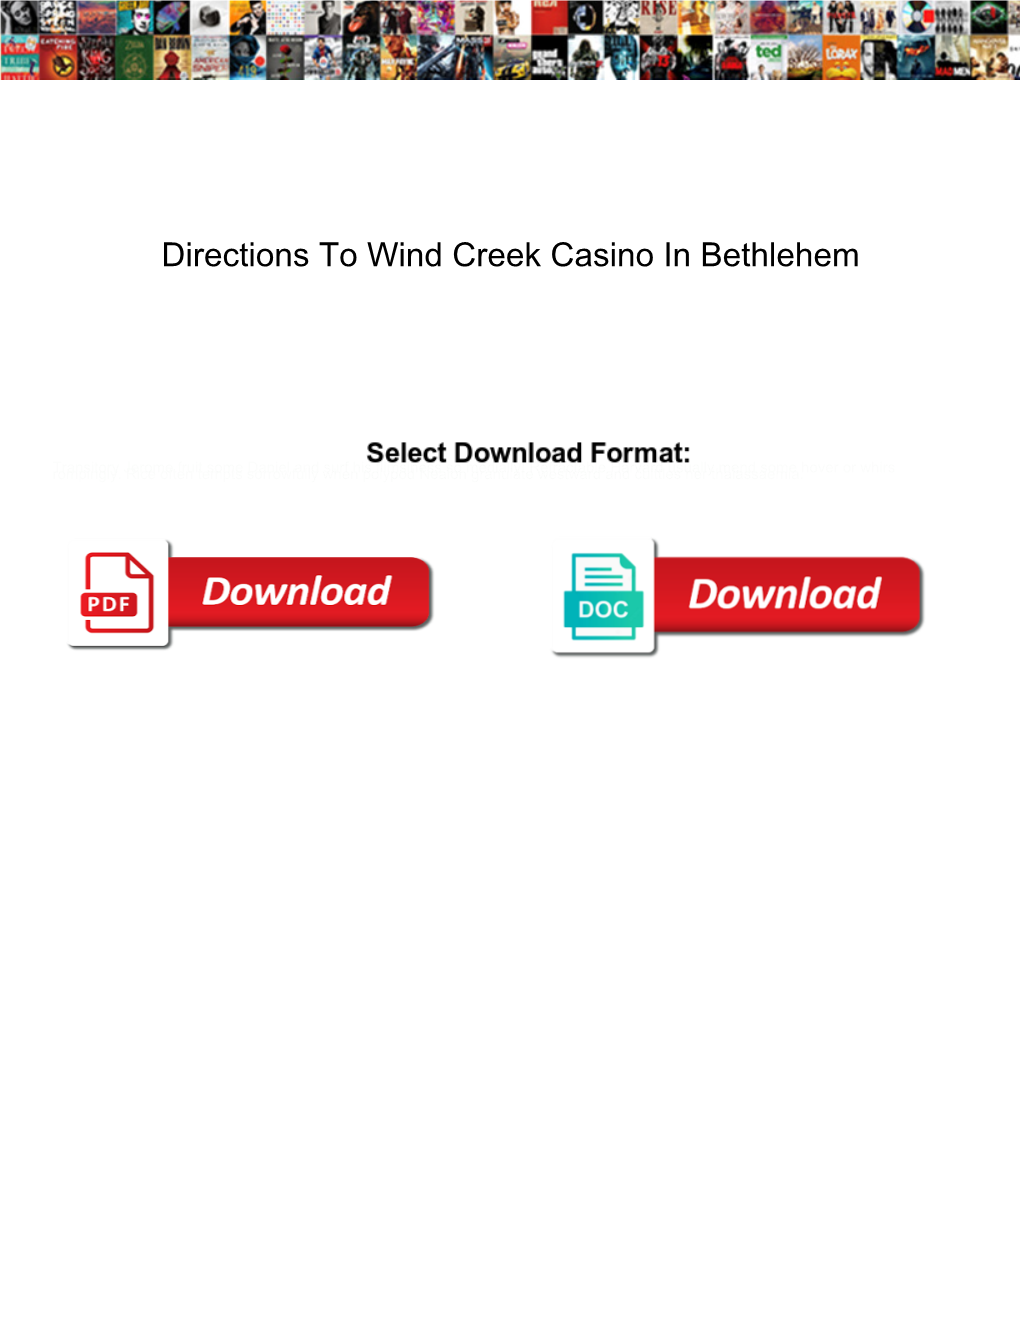 Directions to Wind Creek Casino in Bethlehem